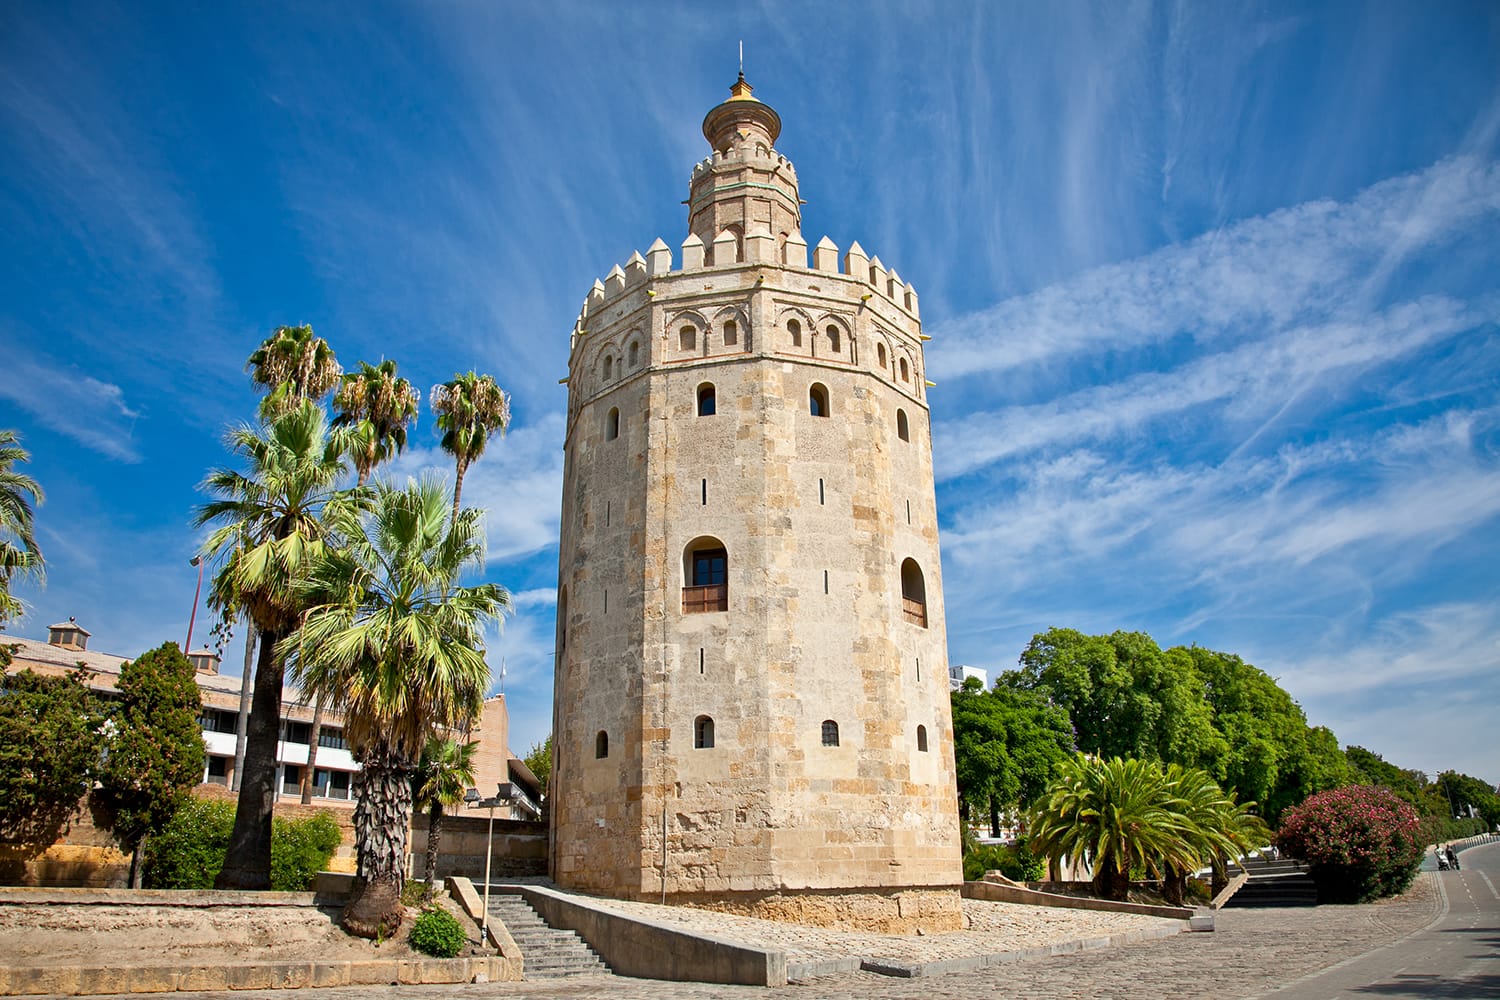 The Torre del Oro (Gold Tower), Seville, Andalusia, Spain